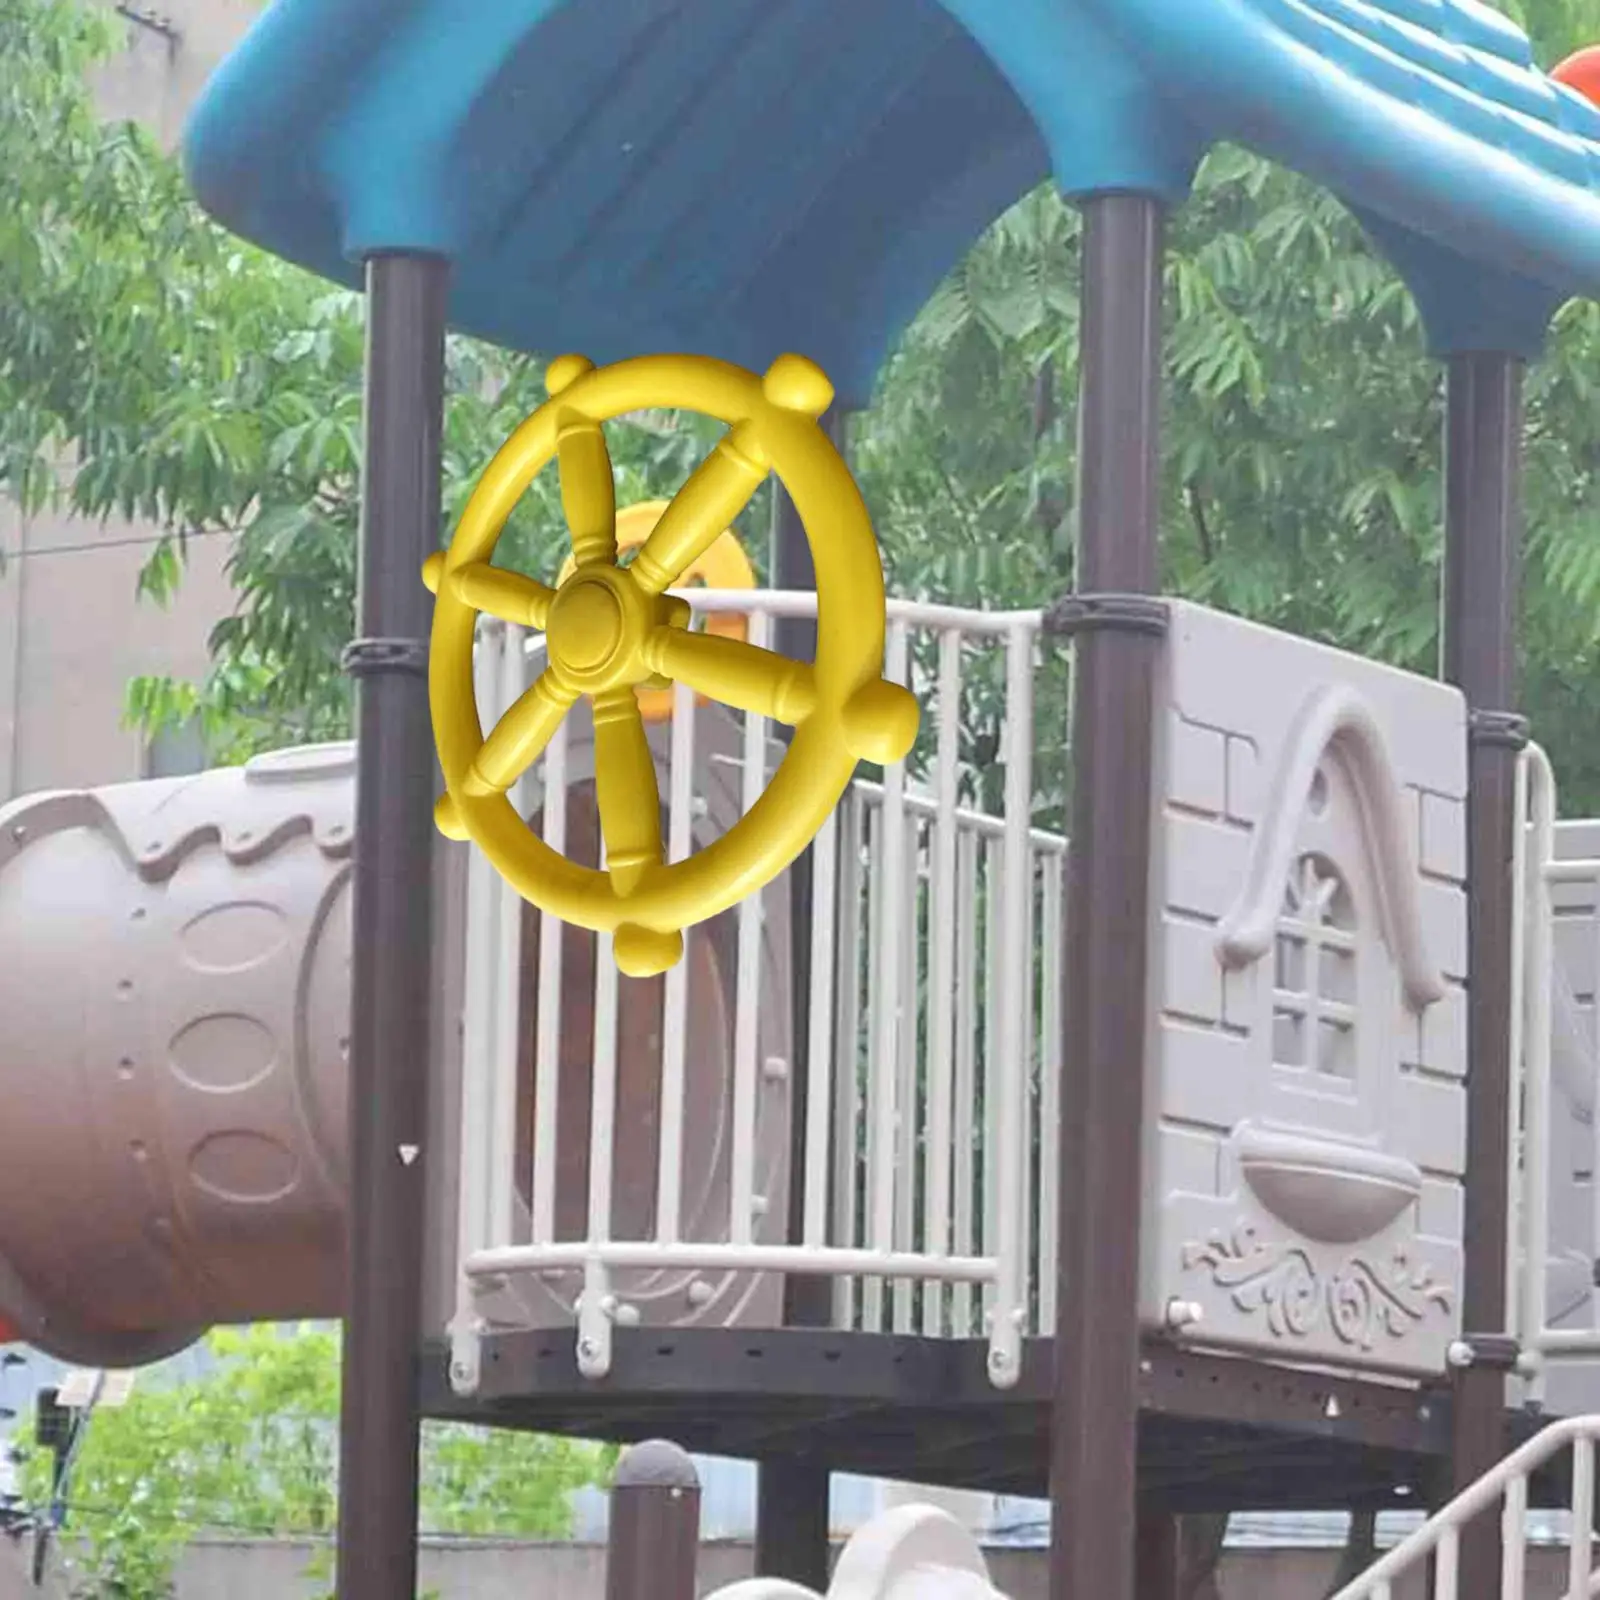 Pirate Ship Wheel Multipurpose Climb Props Playground Accessories for Park Amusement Park Outdoor Playhouse Tree House